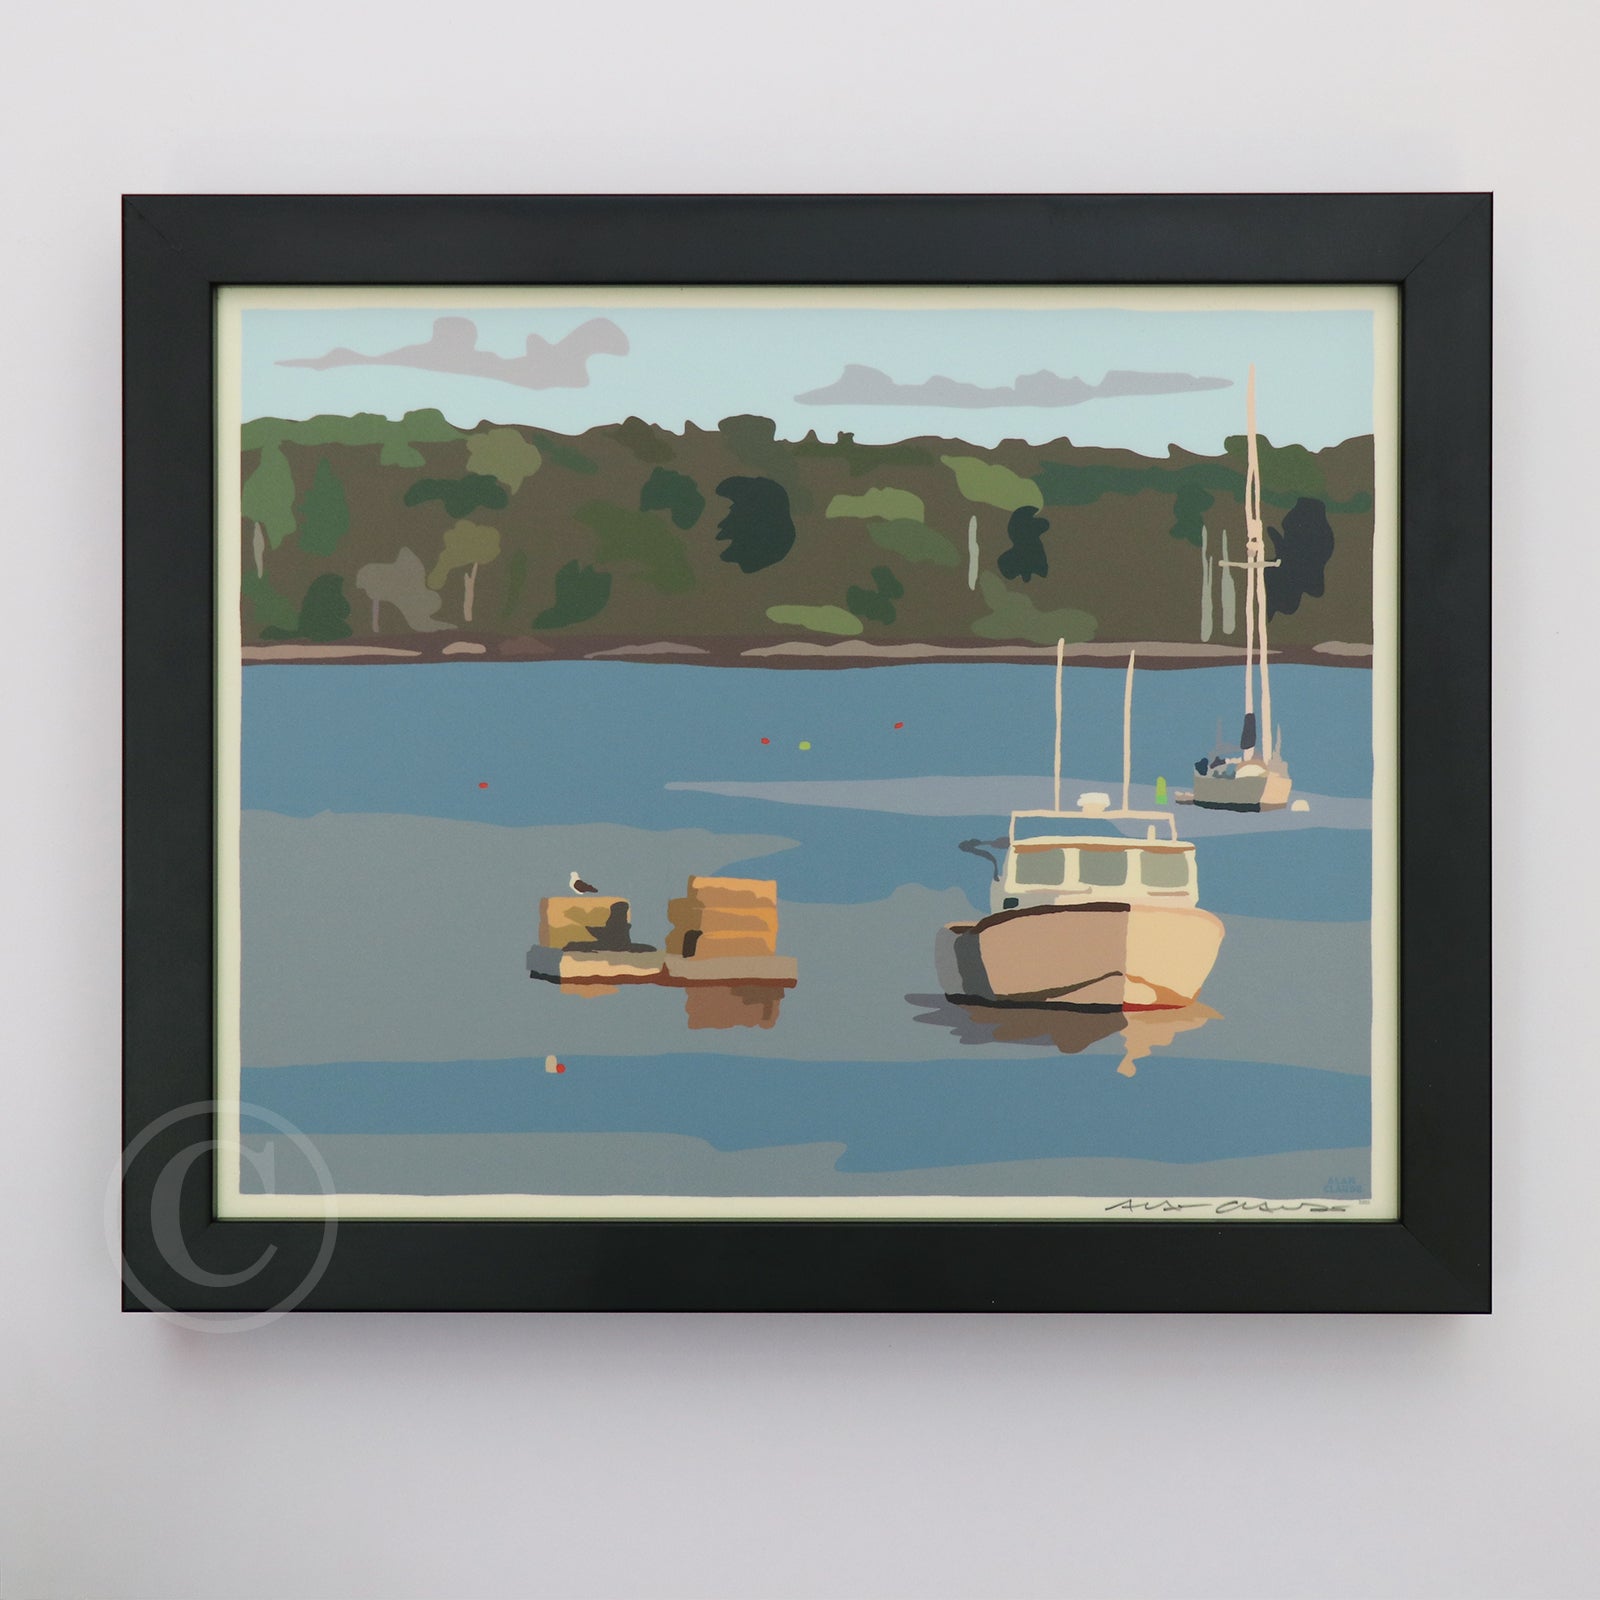 Lobster Boat in Round Pond Harbor Art Print 8" x 10" Horizontal Framed Wall Poster By Alan Claude - Maine